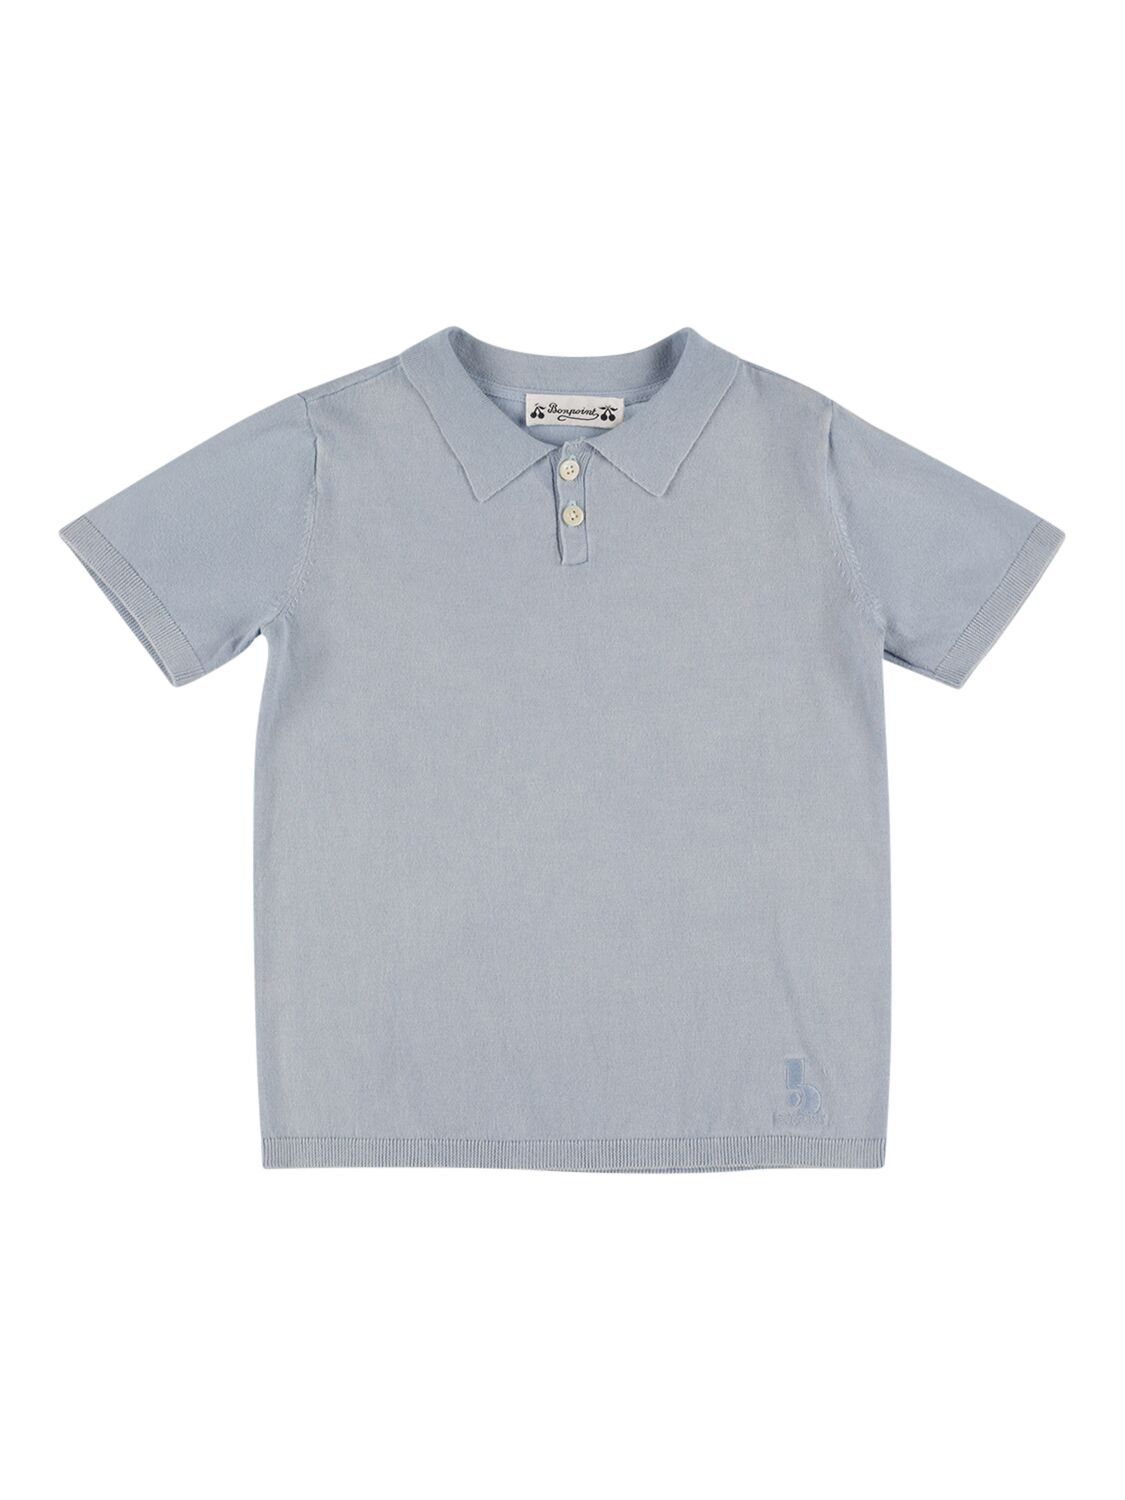 Bonpoint Kids' Embroidered Cotton Jersey Polo Shirt In Light Blue